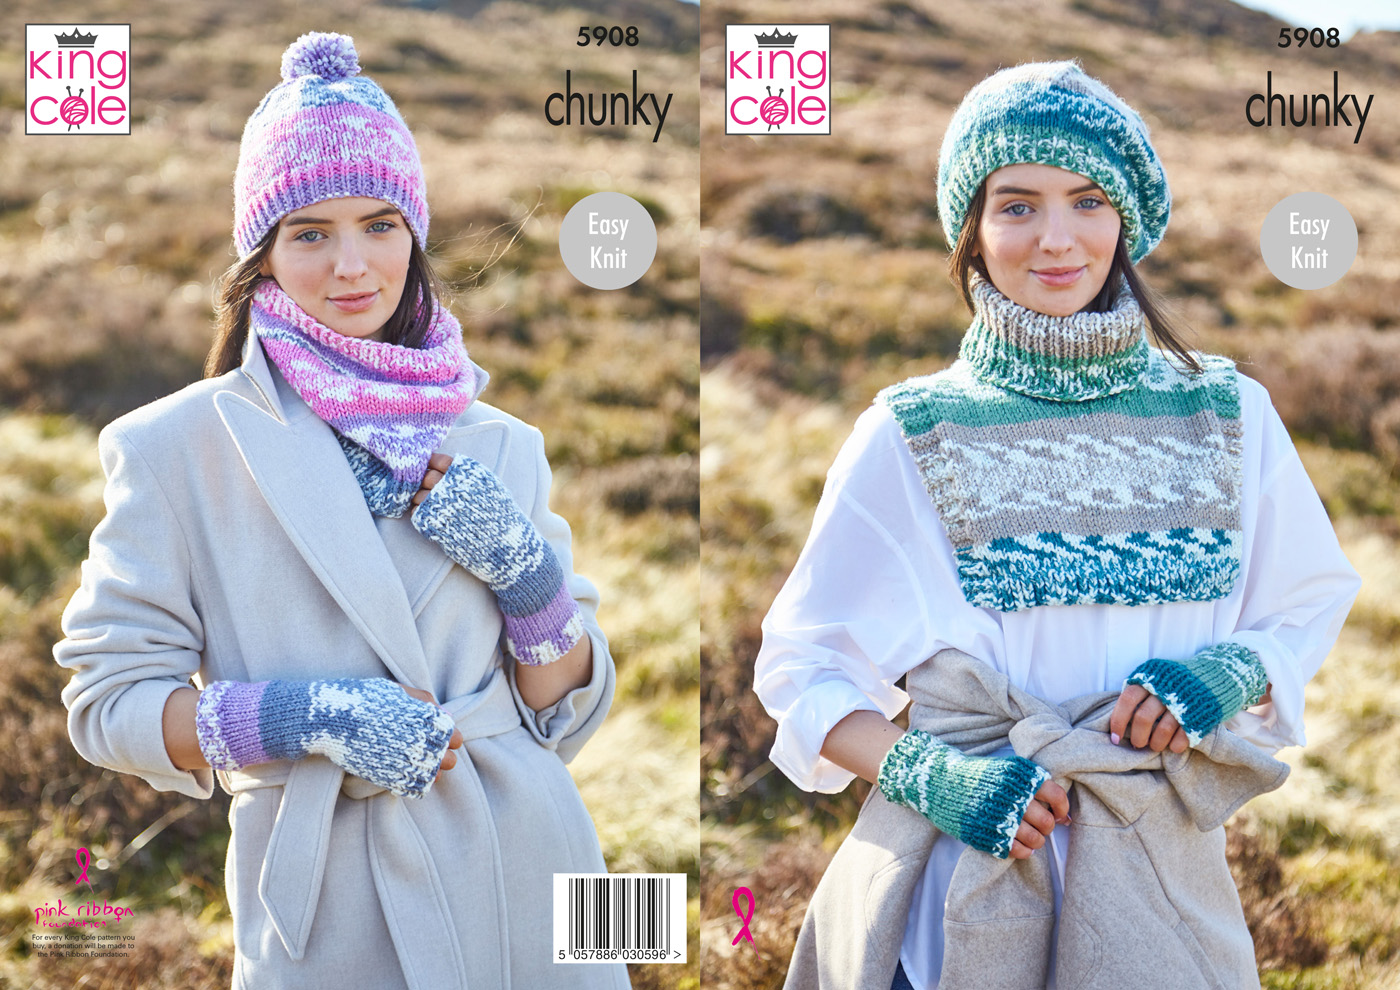 Accessories: Knitted in King Cole Nordic Chunky 5908